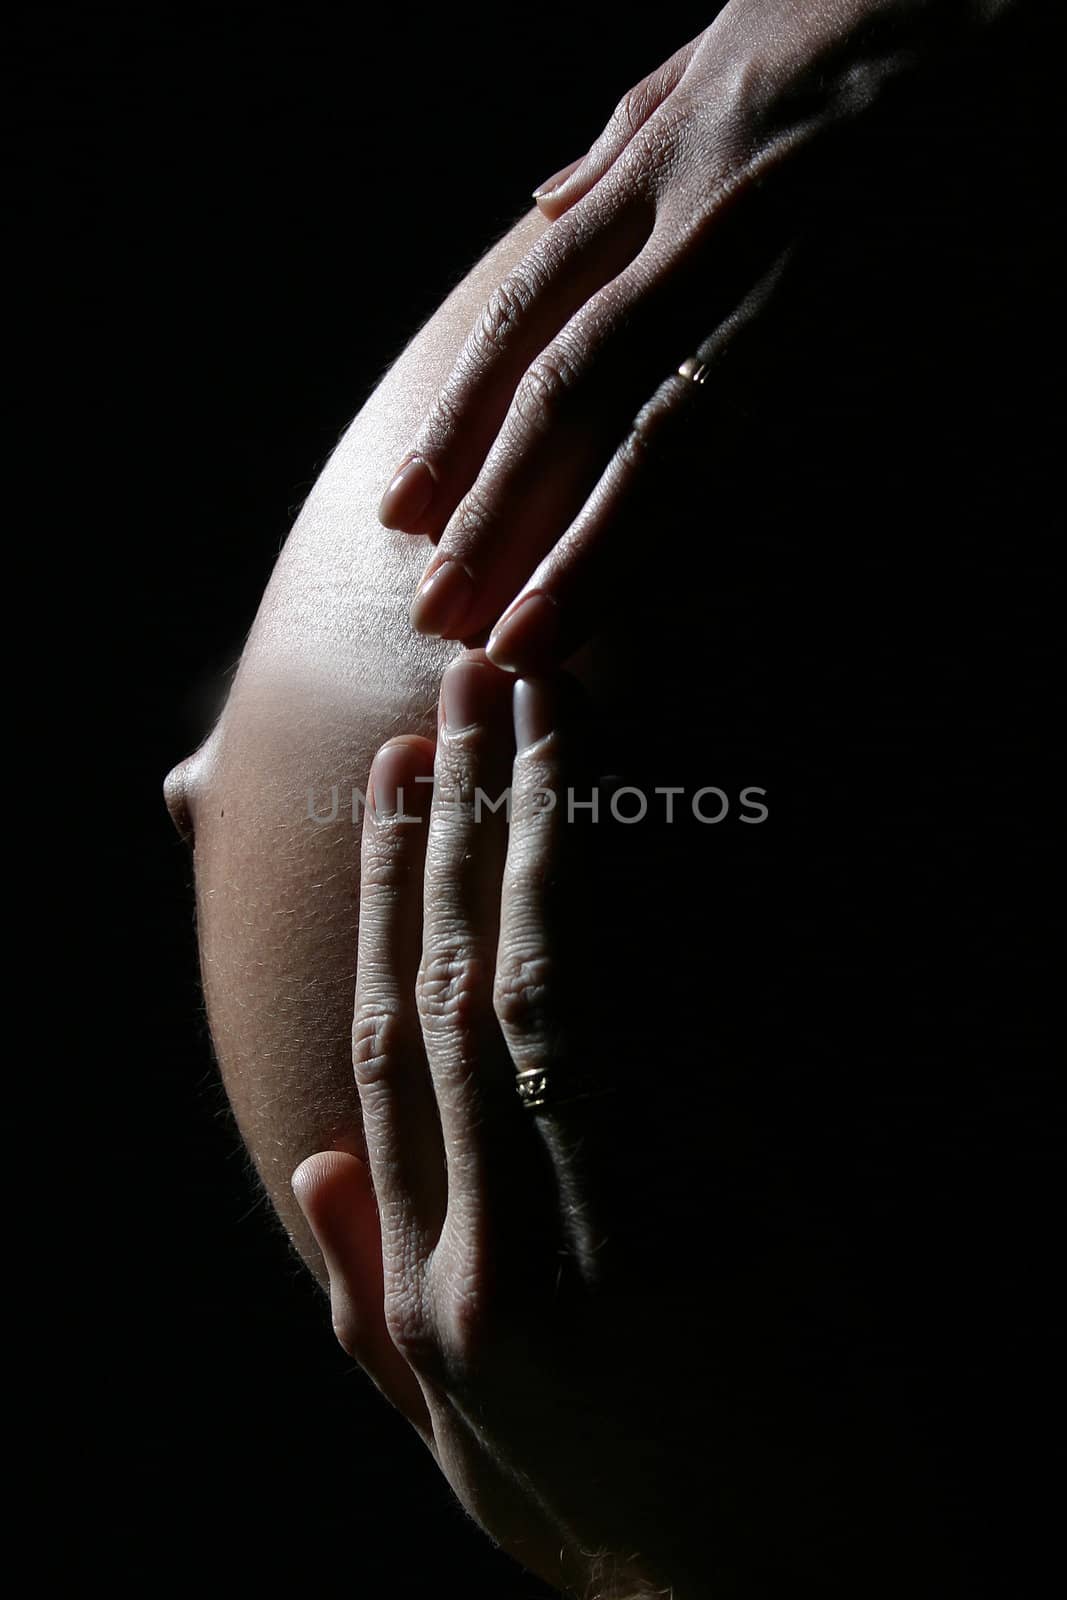 Two hands are giving warmth to unborn baby.